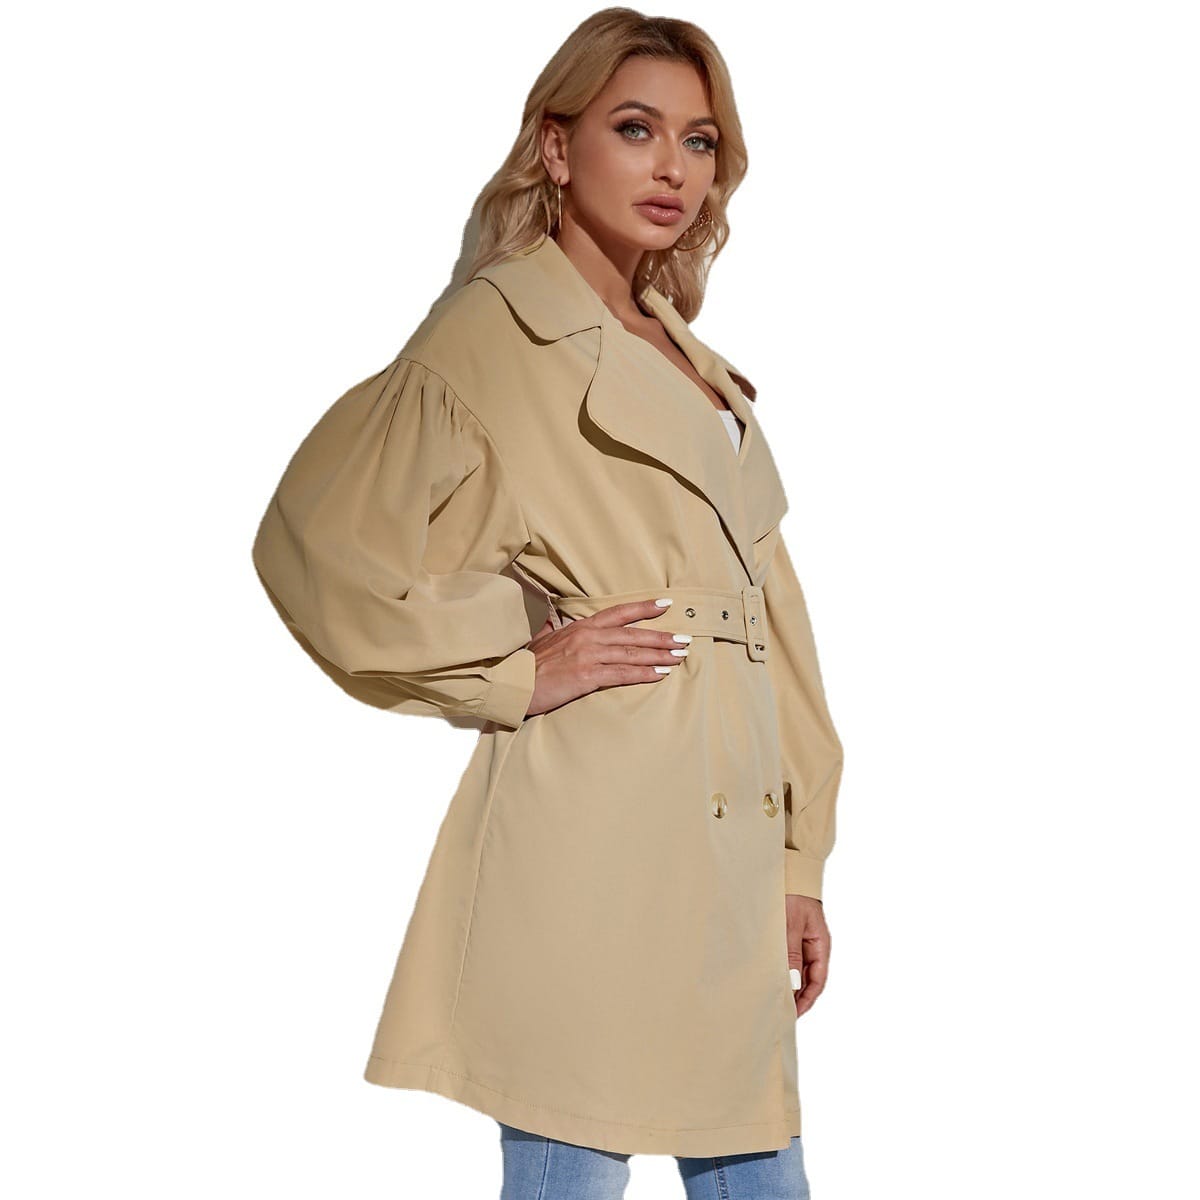 Lovemi - Women Double Breasted Trench Coat Vintage Long